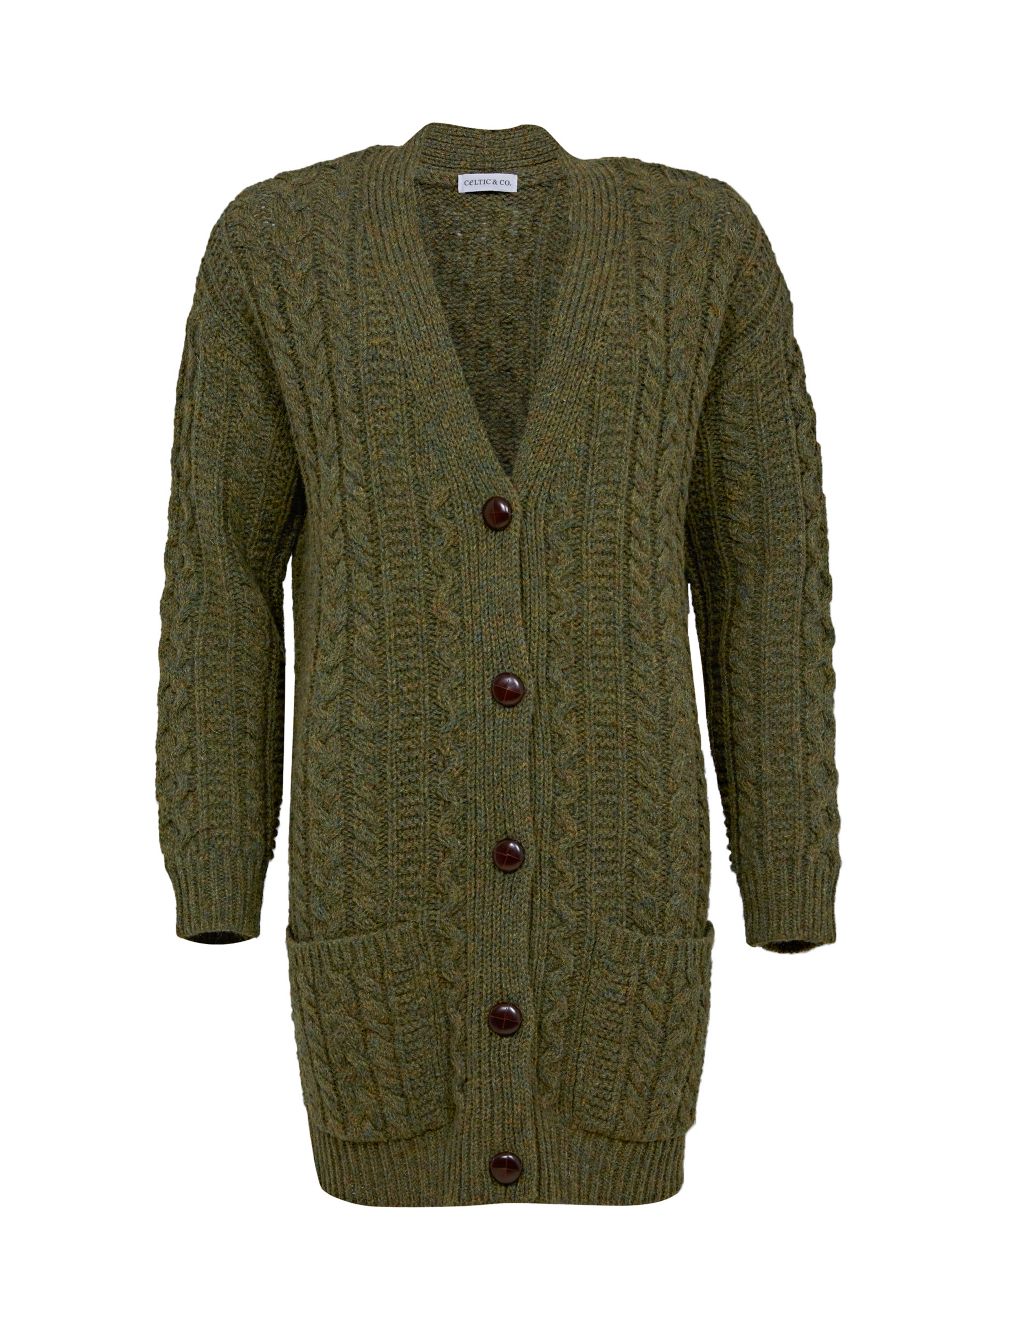 Pure Wool Cable Knit Boyfriend Cardigan image 2